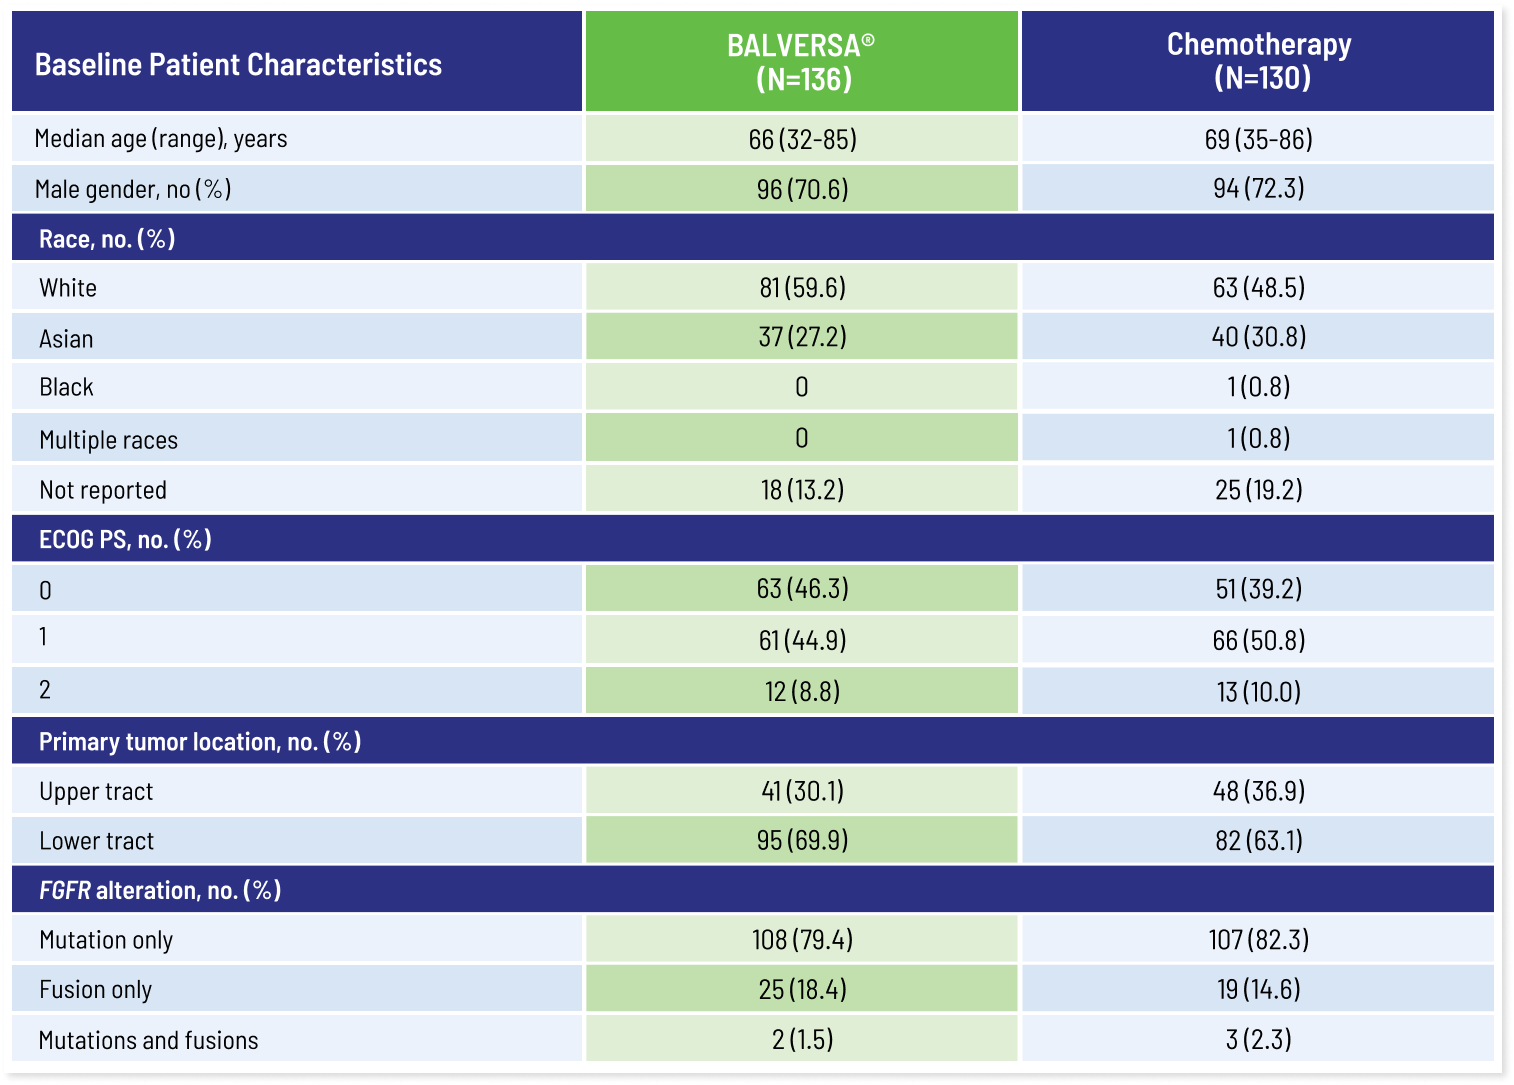 Flow chart showing the patient characteristics table for BALVERSA